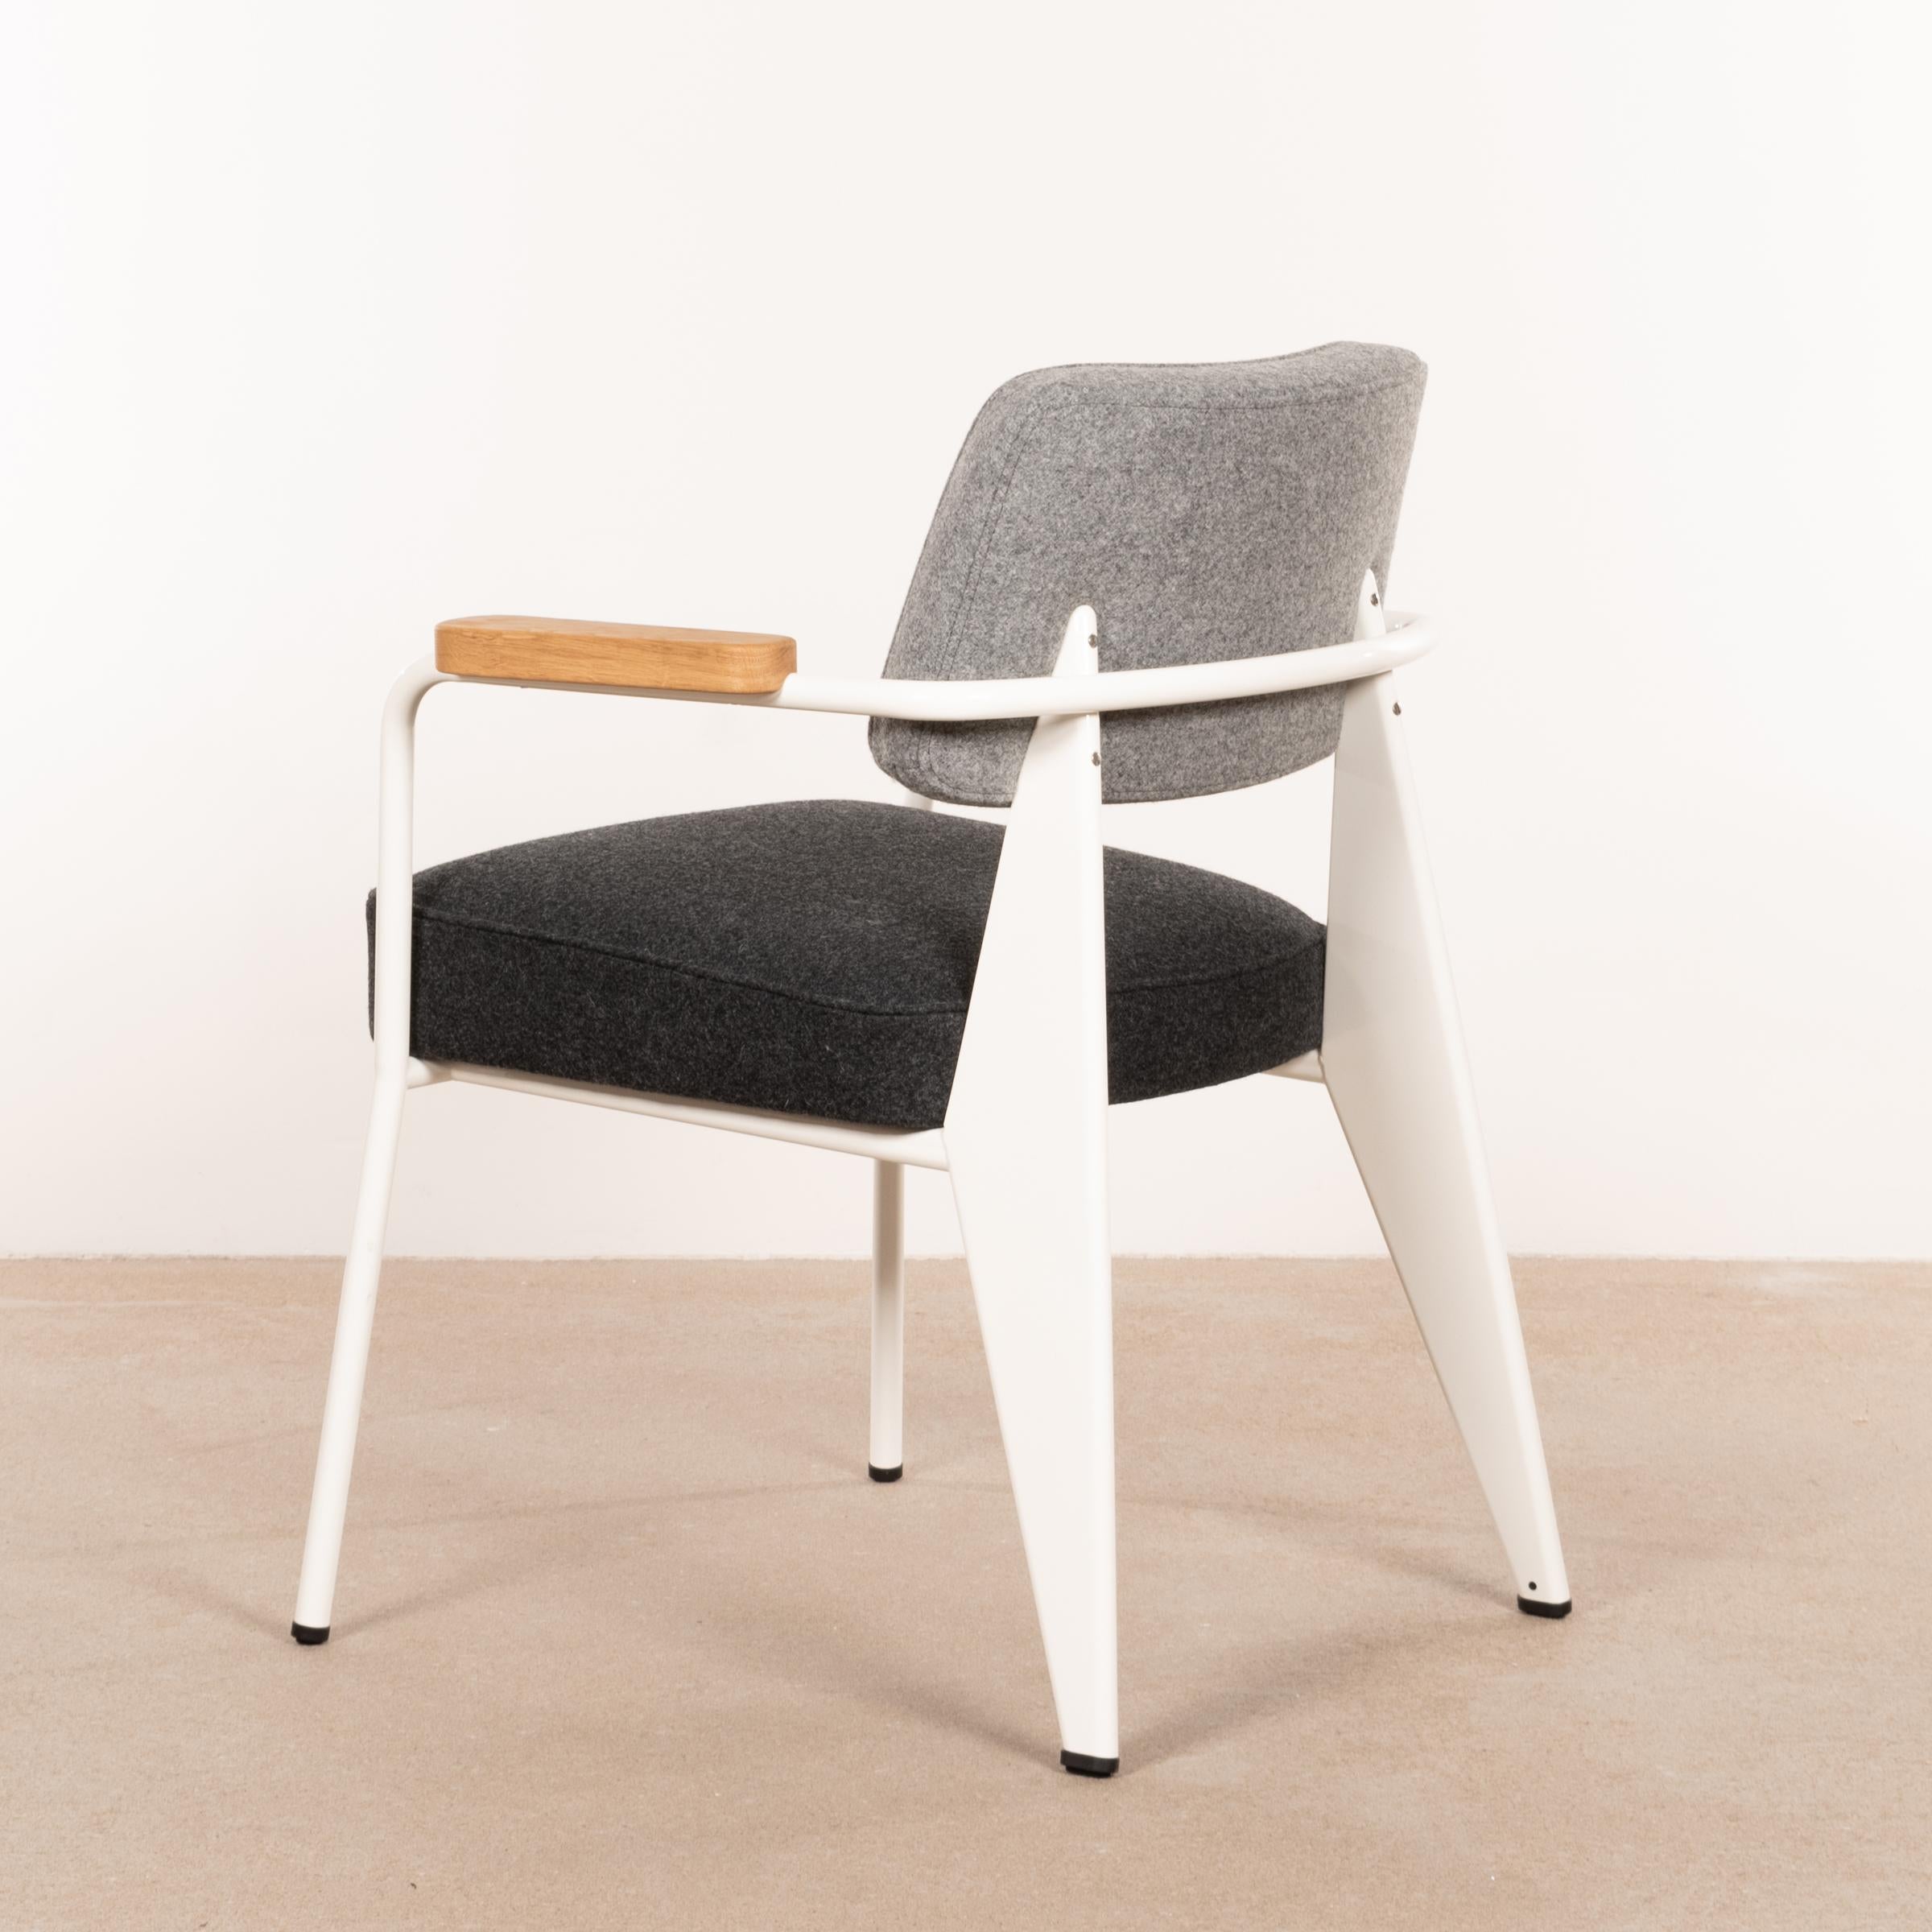 Iconic Fauteuil Direction designed by Jean Prouvé in 1951 and manufactured by Vitra in 2019. White powder-coated frame with cushions in dark en medium grey wool. Excellent new condition and labelled.